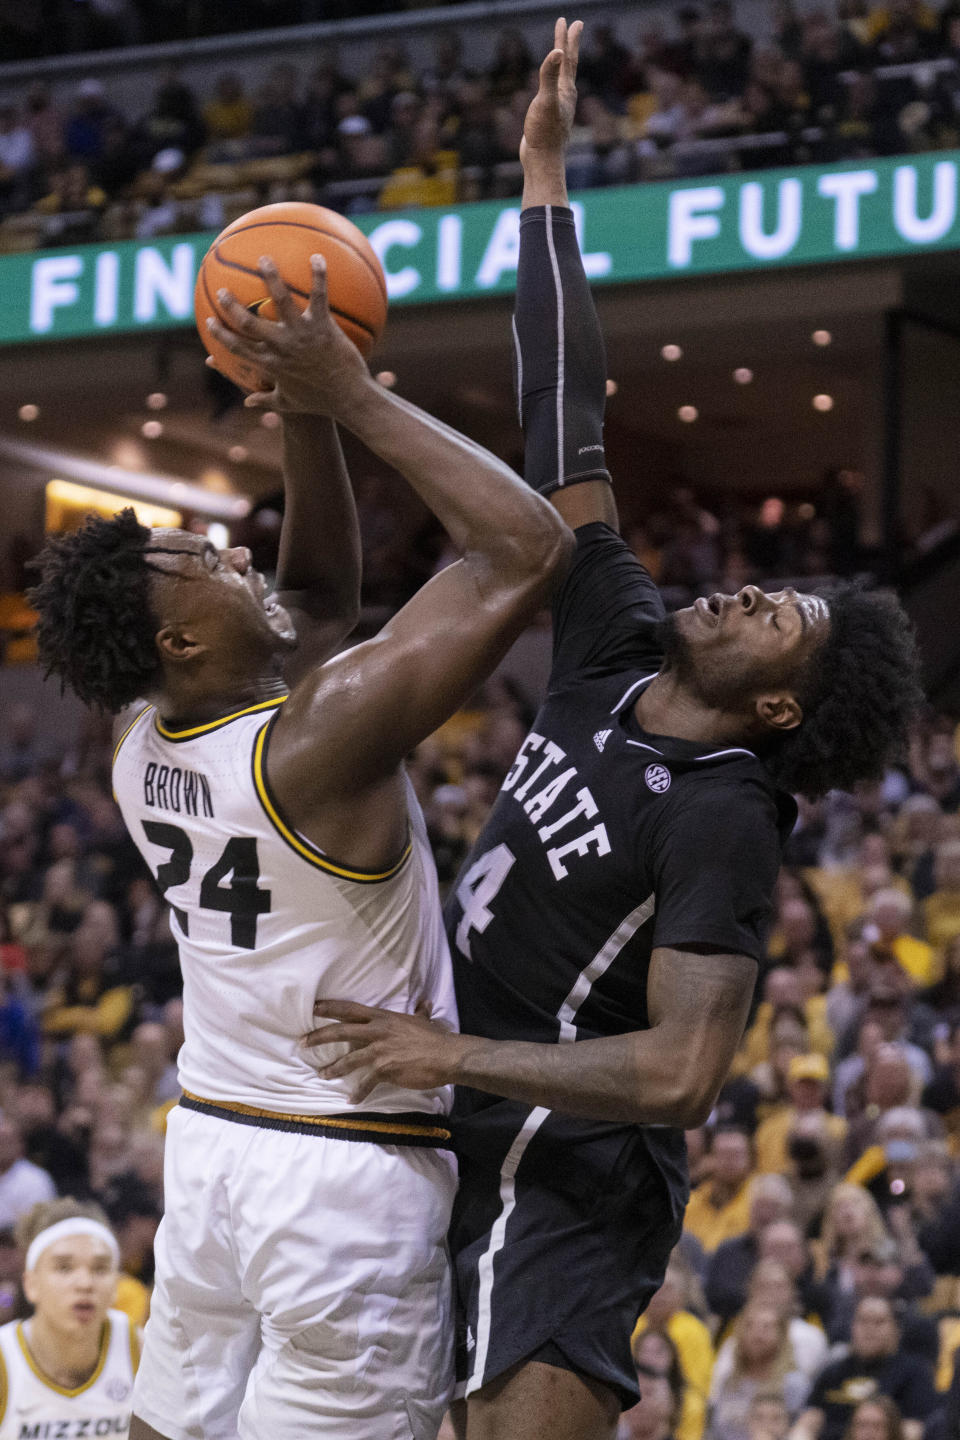 Missouri's Kobe Brown, left, shoots over Mississippi State's Cameron Matthews during the second half of an NCAA college basketball game Tuesday, Feb. 21, 2023, in Columbia, Mo. Missouri won 66-64 in overtime. (AP Photo/L.G. Patterson)